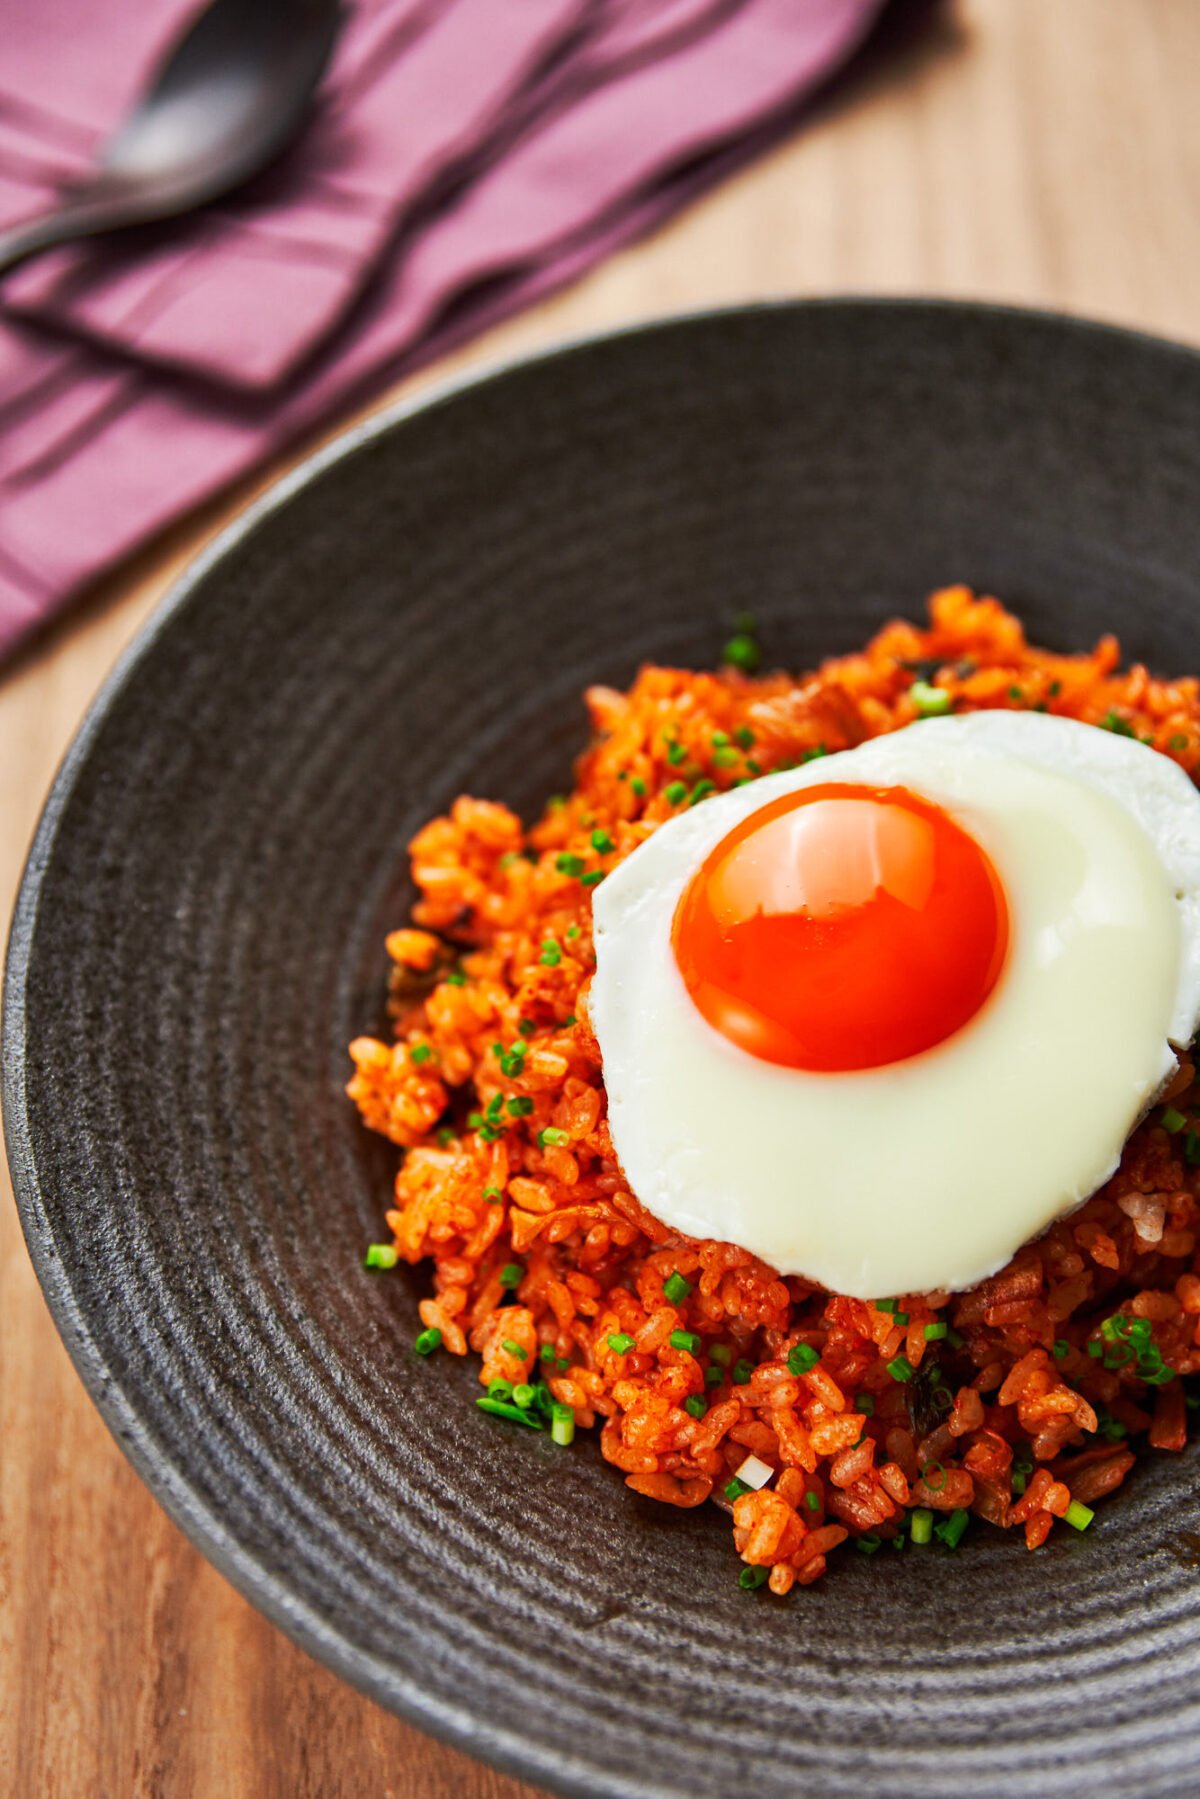 Spicy and loaded wtih flavor, this easy kimchi fried rice with a fried egg on top comes together from just a handful of ingredients.